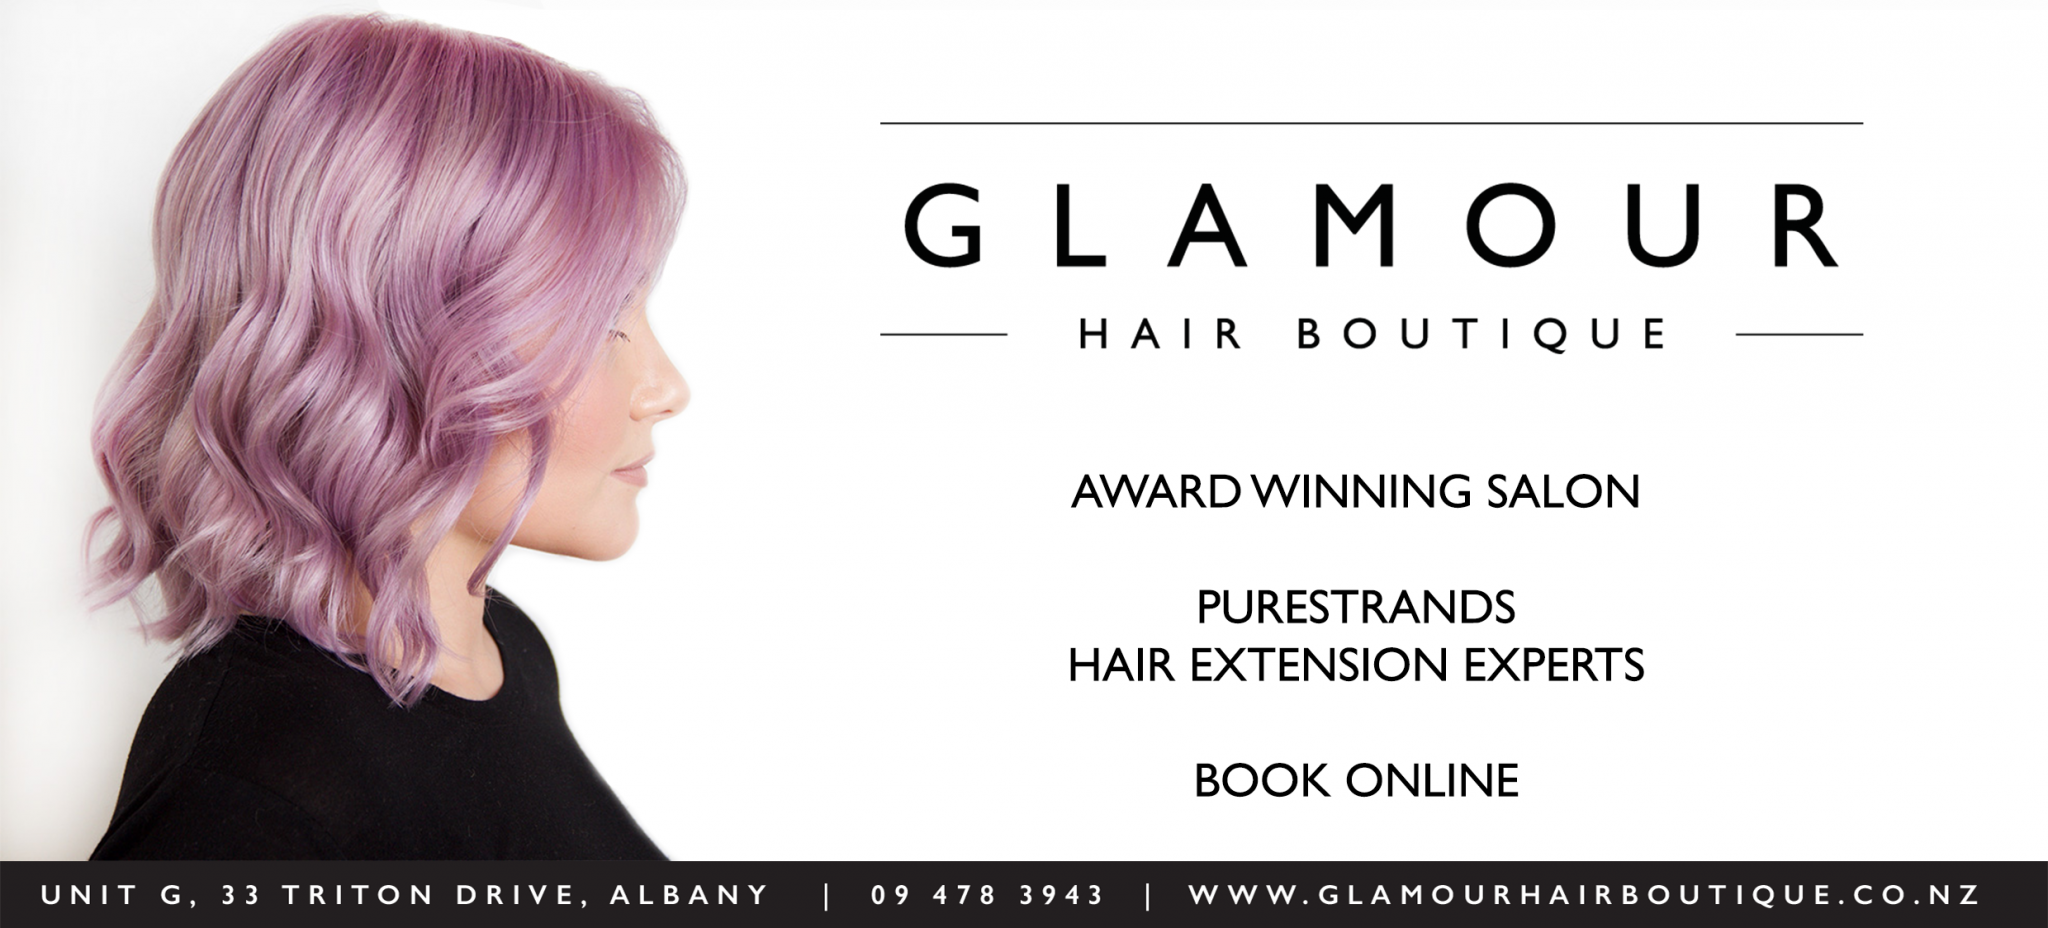 Best hair salon in Auckland rated by top reviews – Glamour Hair Boutique